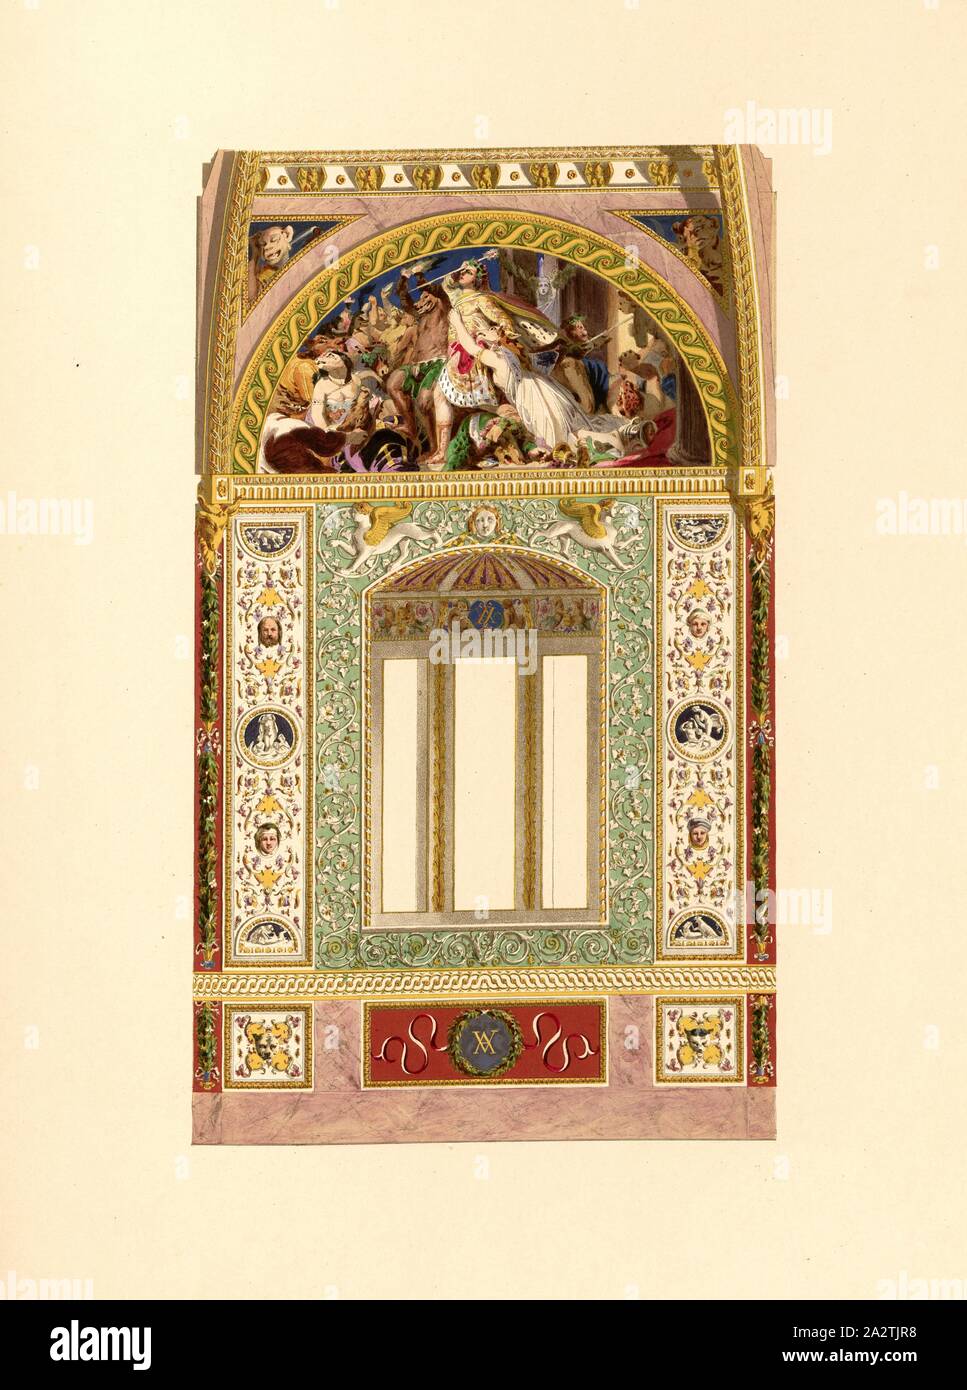 One of the sides of the octagon, e-f of the plan, Decorative Painting in the Octagon Room of the Summer House in the Garden of Buckingham Palace, Date Appreciated, Taf. 4, according to p. 11, Ludwig Gruner; Anna Jameson: The decorations of the garden-pavilion in the grounds of Buckingham Palace. London: publ. by John Murray; Longman & Co.; P. & D. Colnaghi; F. G. Moon; and L. Gruner, MDCCCXLVI Stock Photo